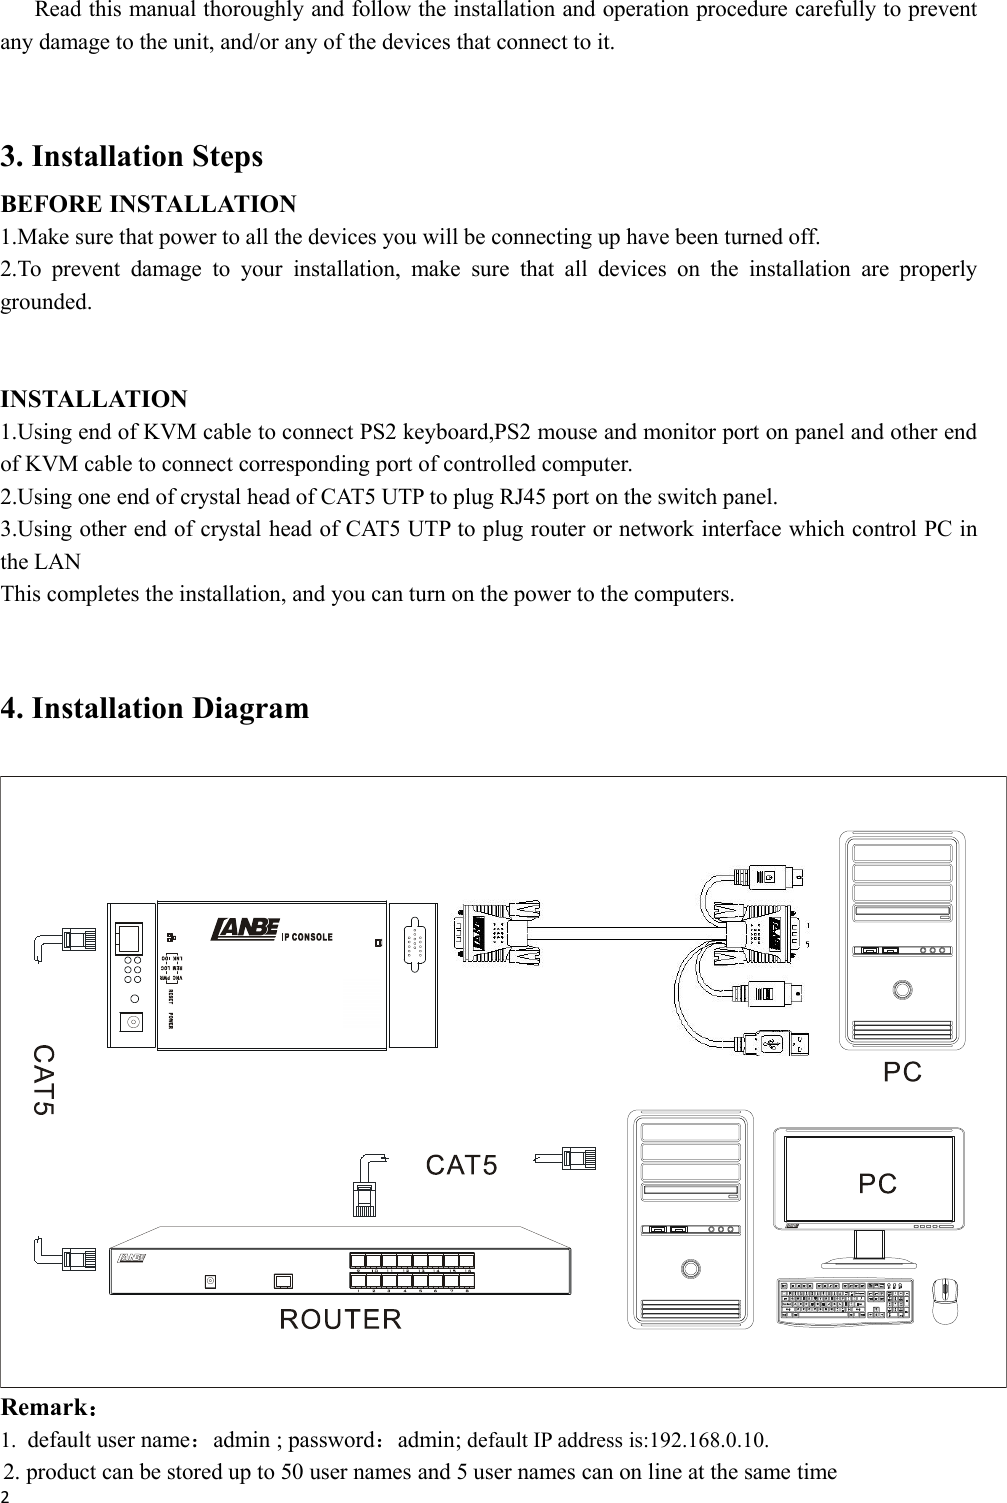 2Read this manual thoroughly and follow the installation and operation procedure carefully to preventany damage to the unit, and/or any of the devices that connect to it.3. Installation StepsBEFORE INSTALLATION1.Make sure that power to all the devices you will be connecting up have been turned off.2.To prevent damage to your installation, make sure that all devices on the installation are properlygrounded.INSTALLATION1.Using end of KVM cable to connect PS2 keyboard,PS2 mouse and monitor port on panel and other endof KVM cable to connect corresponding port of controlled computer.2.Using one end of crystal head of CAT5 UTP to plug RJ45 port on the switch panel.3.Using other end of crystal head of CAT5 UTP to plug router or network interface which control PC inthe LANThis completes the installation, and you can turn on the power to the computers.4. Installation DiagramRemark：1. default user name：admin ; password：admin; default IP address is:192.168.0.10.2. product can be stored up to 50 user names and 5 user names can on line at the same time